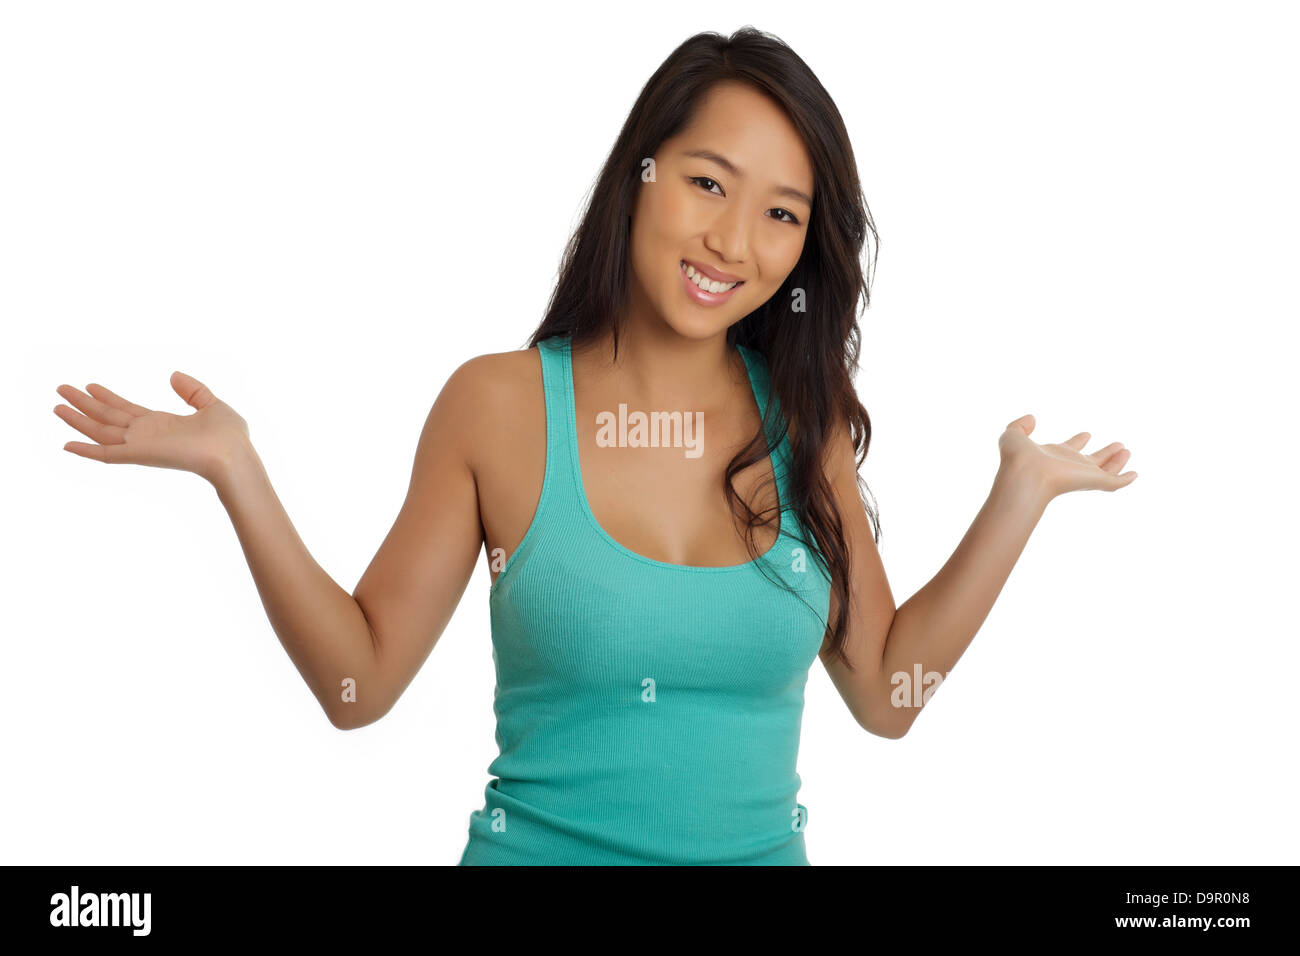 Smiling Asian woman welcome with open hand Stock Photo